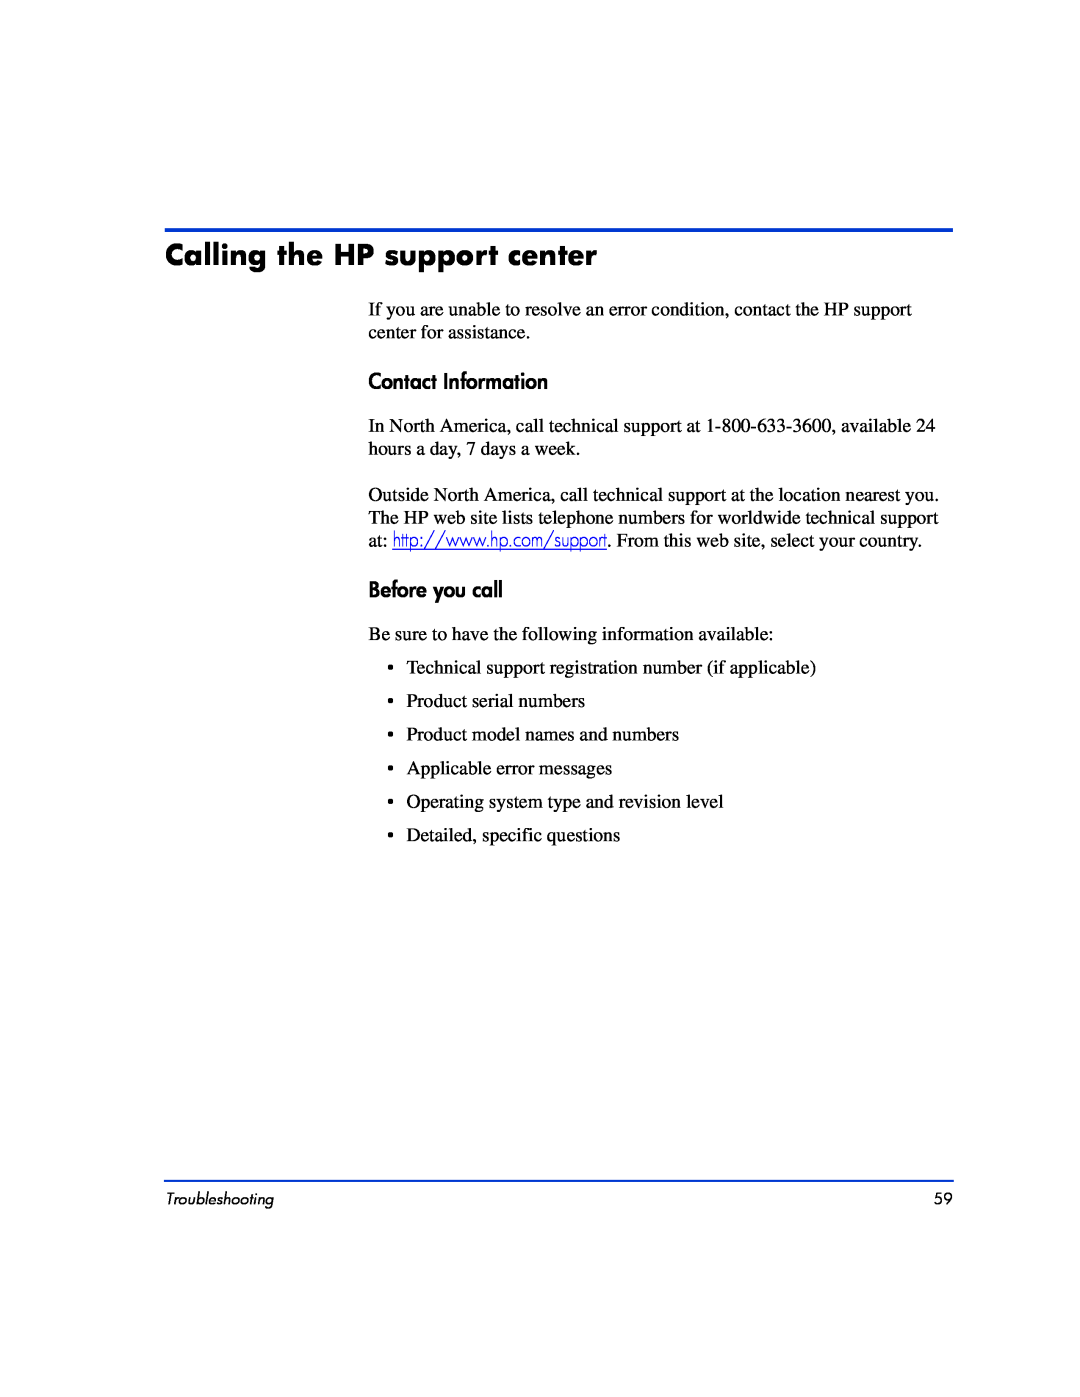 HP XP10000, XP128 manual Calling the HP support center, Contact Information, Before you call 